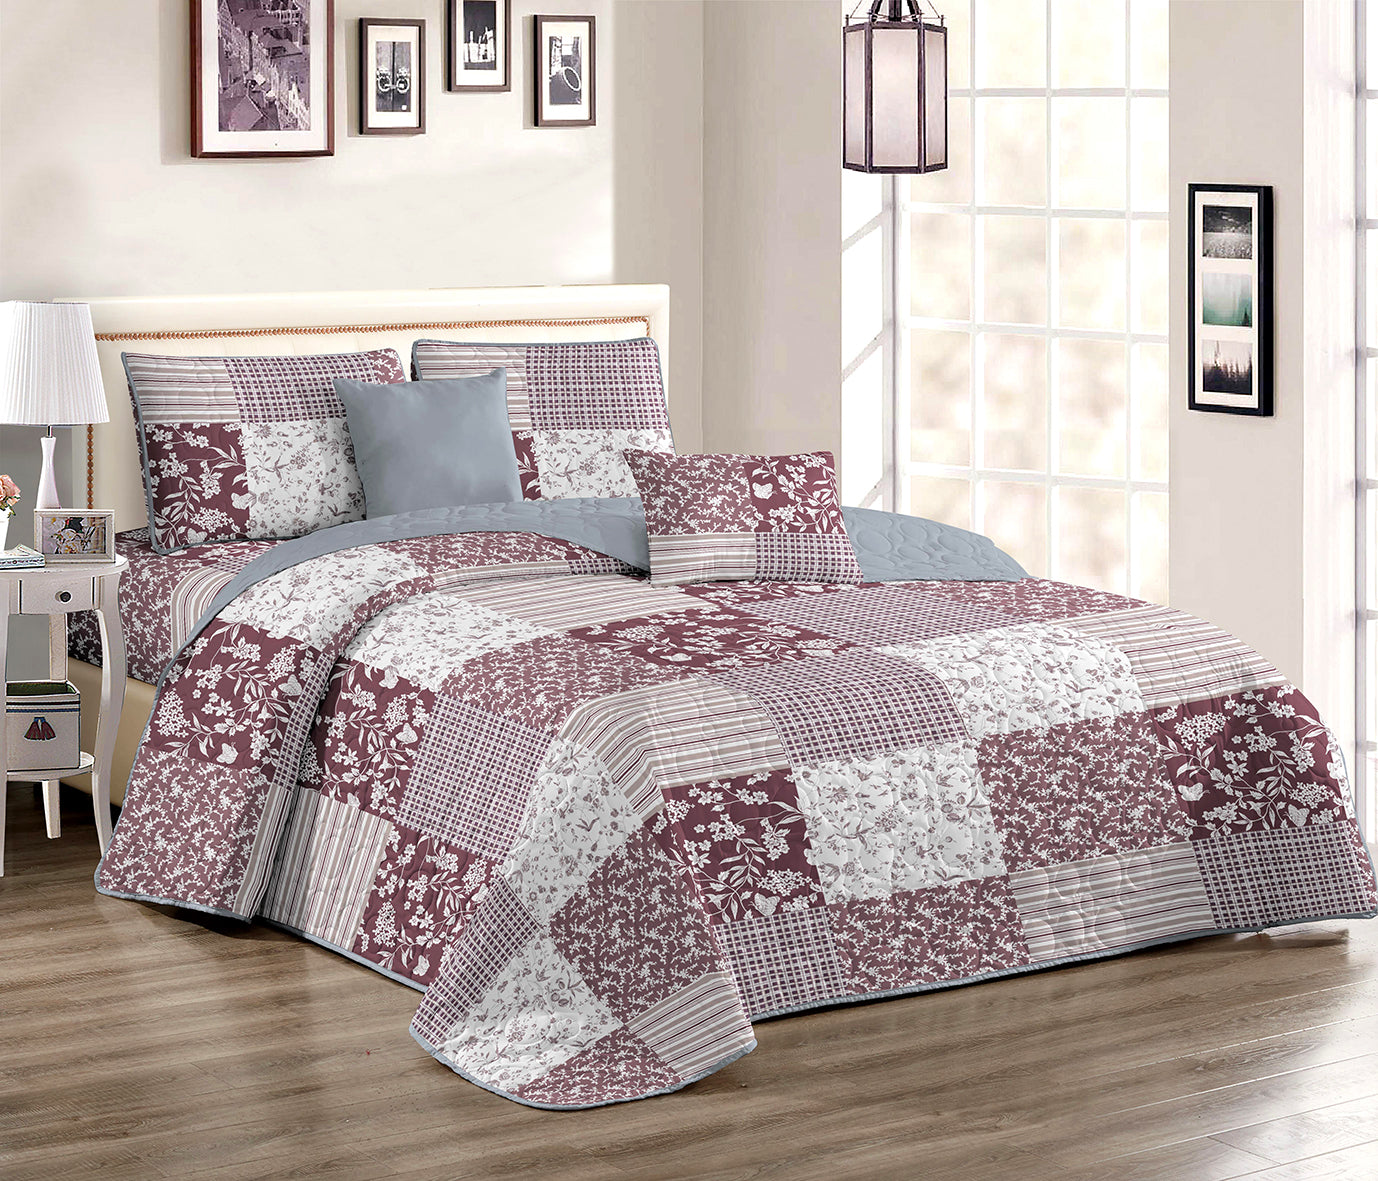 WongsBedding Brown Floral Patchwork Quilt Set With 2 Pillowcases